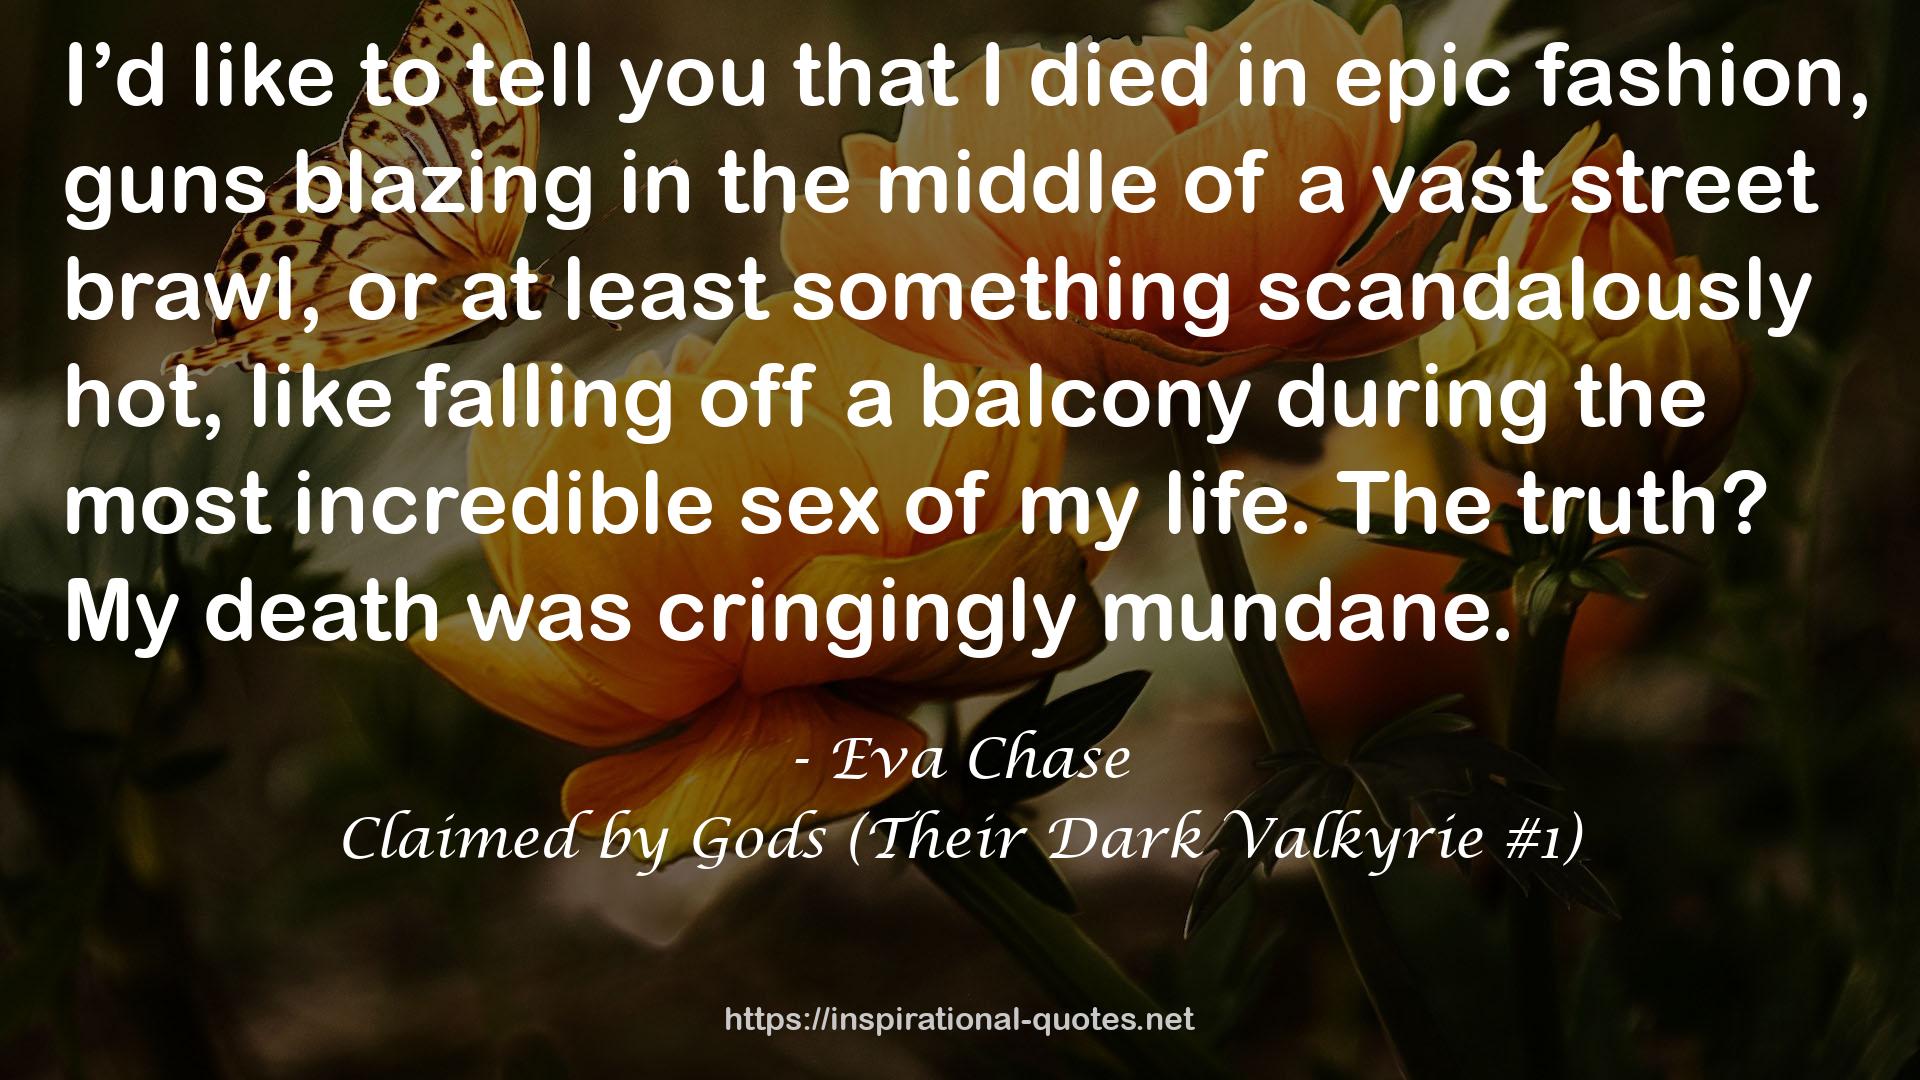 Claimed by Gods (Their Dark Valkyrie #1) QUOTES